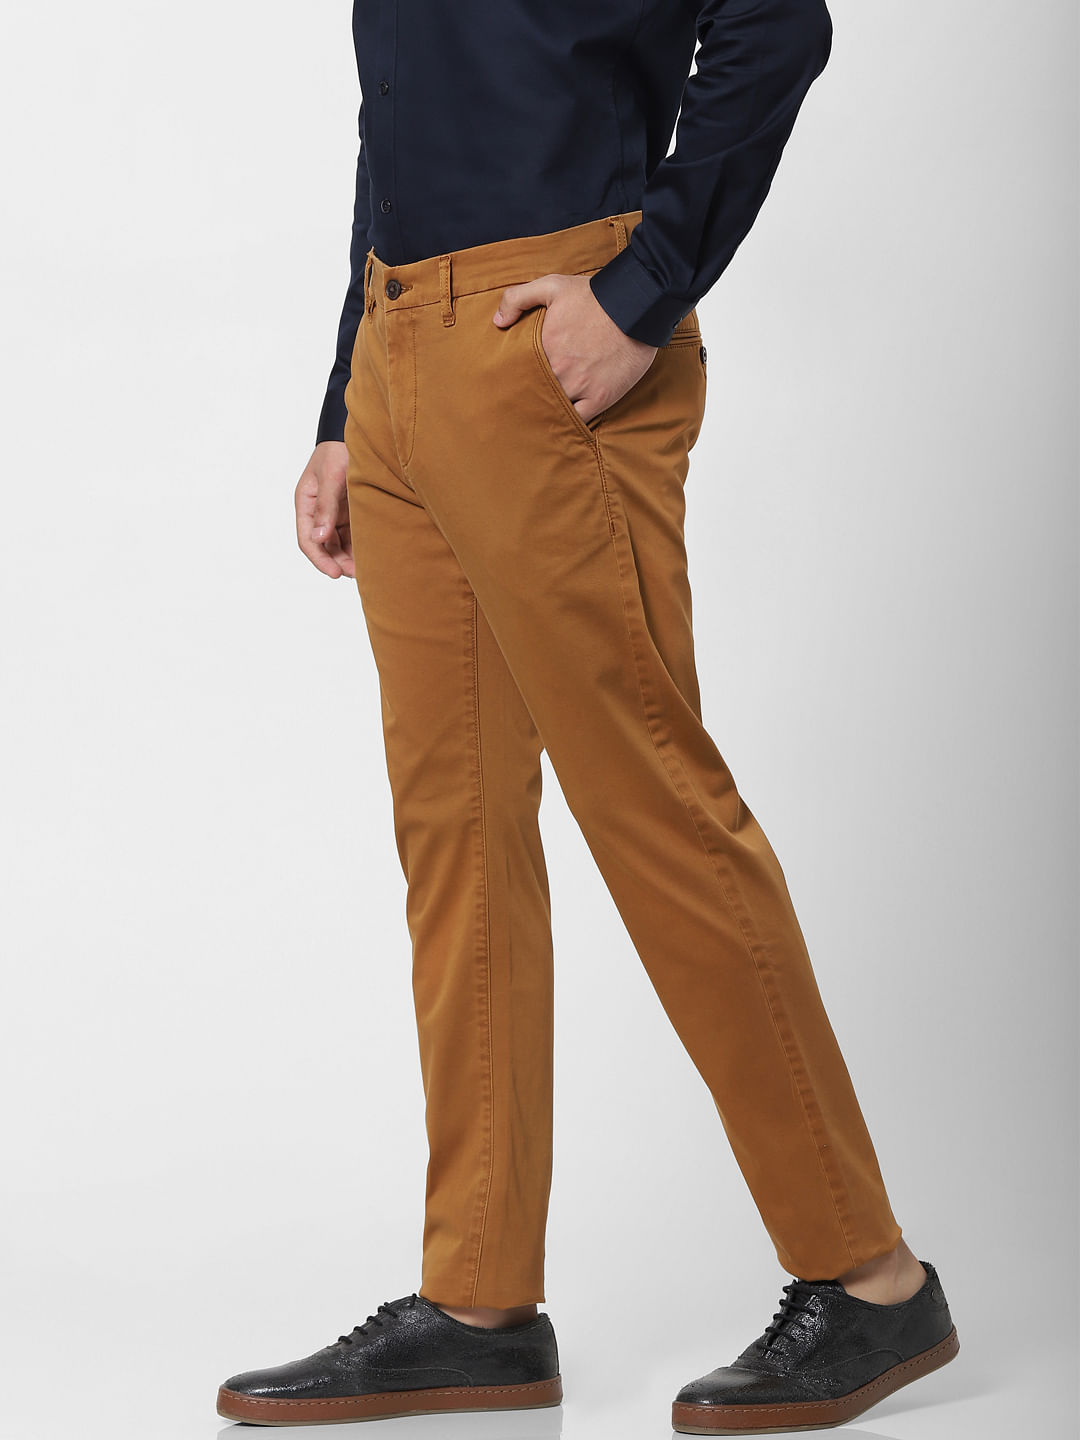 Buy Camel Trousers  Pants for Men by CLUB CHINO Online  Ajiocom